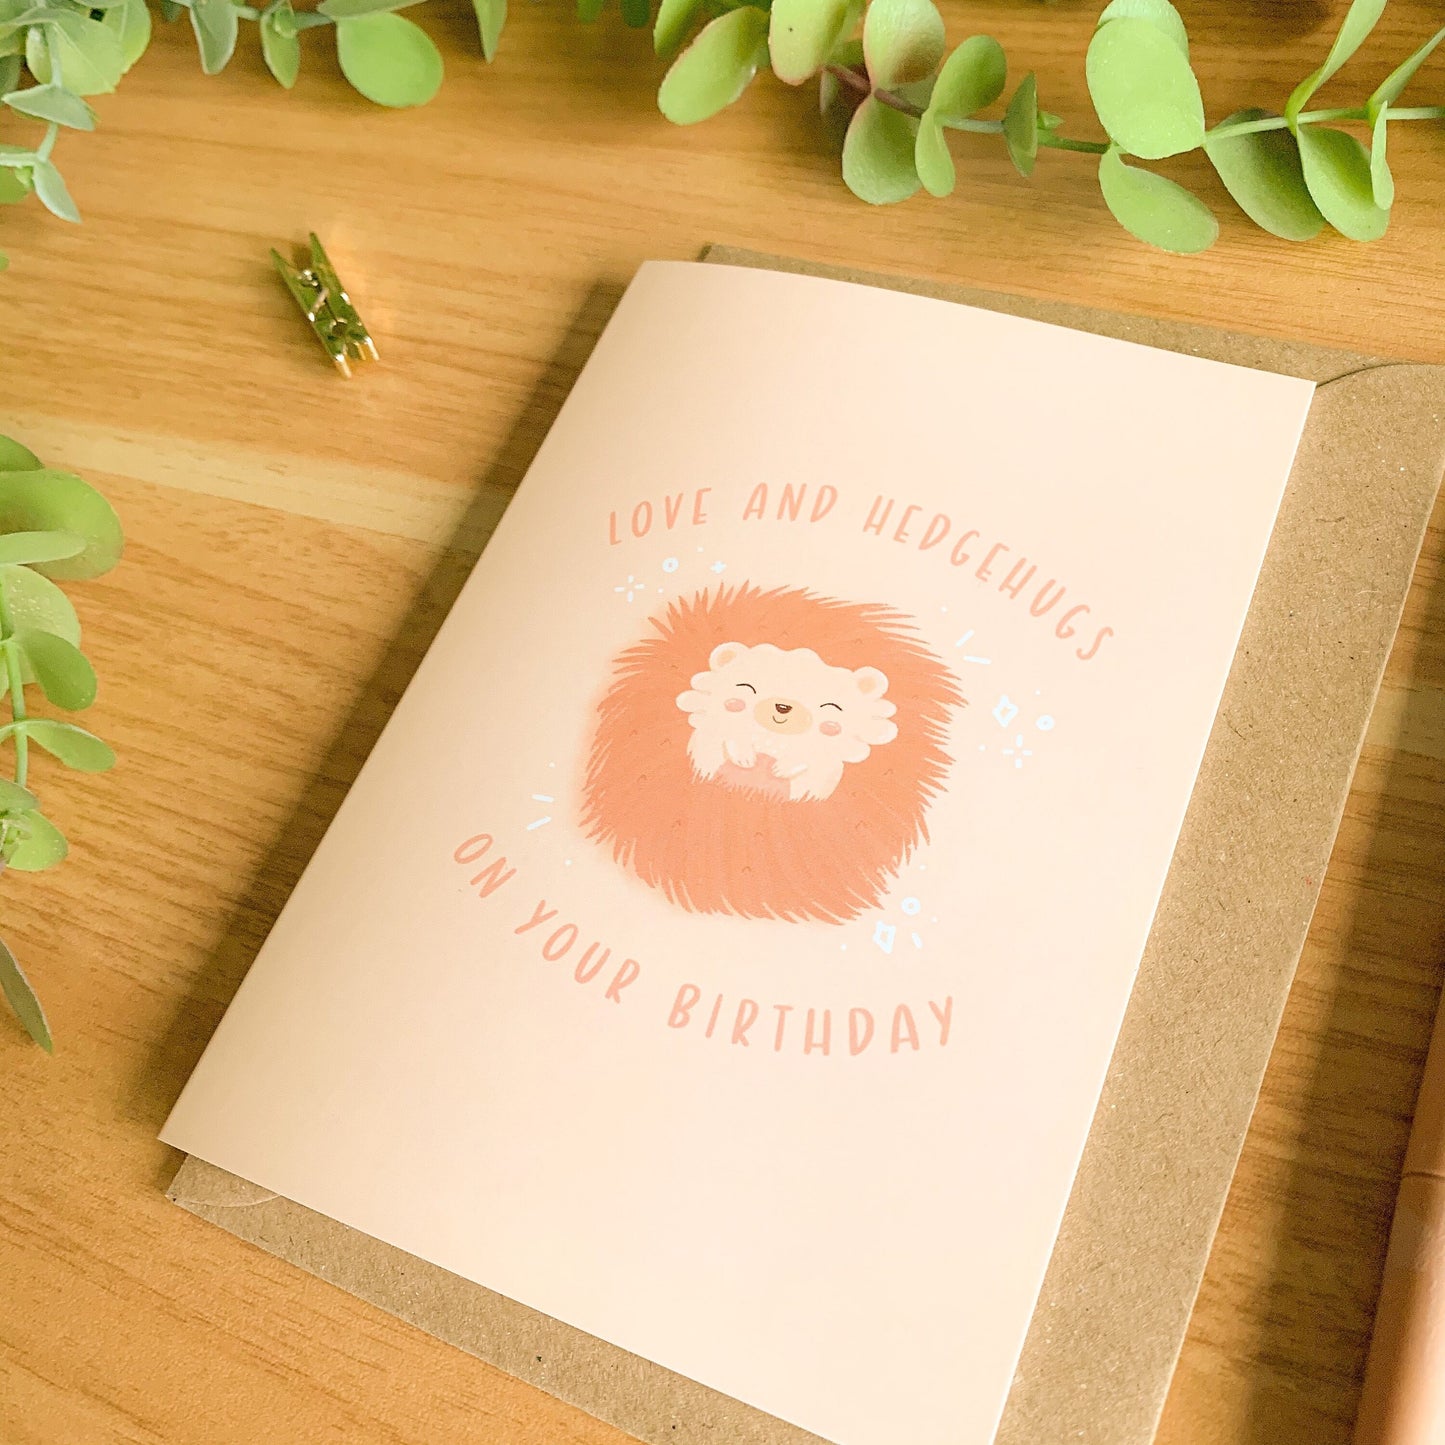 Love and Hedgehugs! - Cute Illustrated Greetings Card